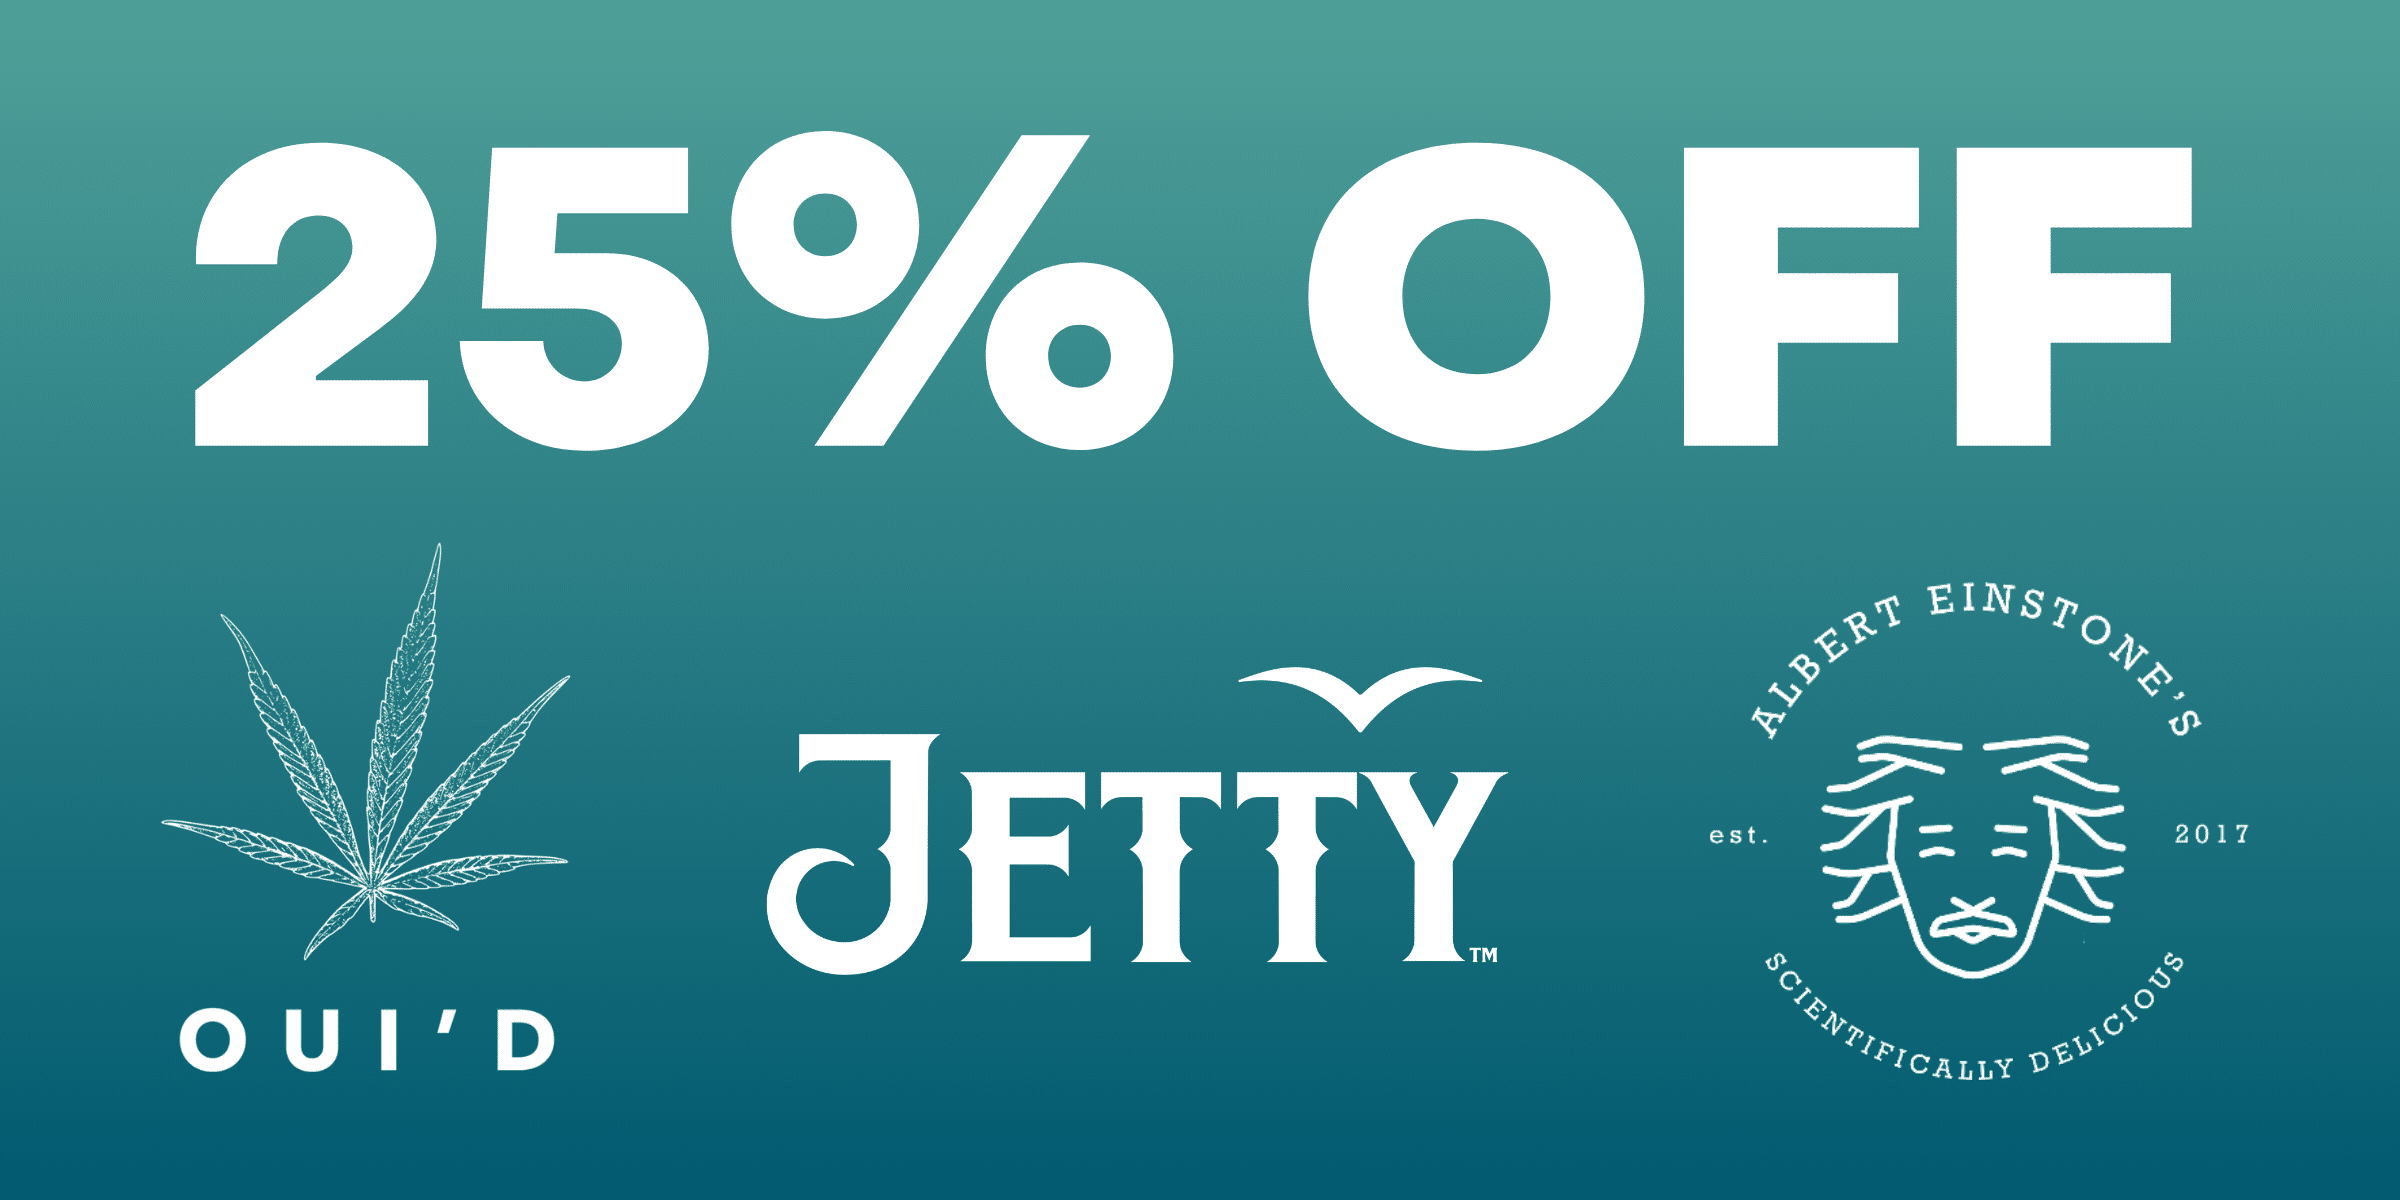 25% off Oui'd, Jetty, and Albert Einstone's